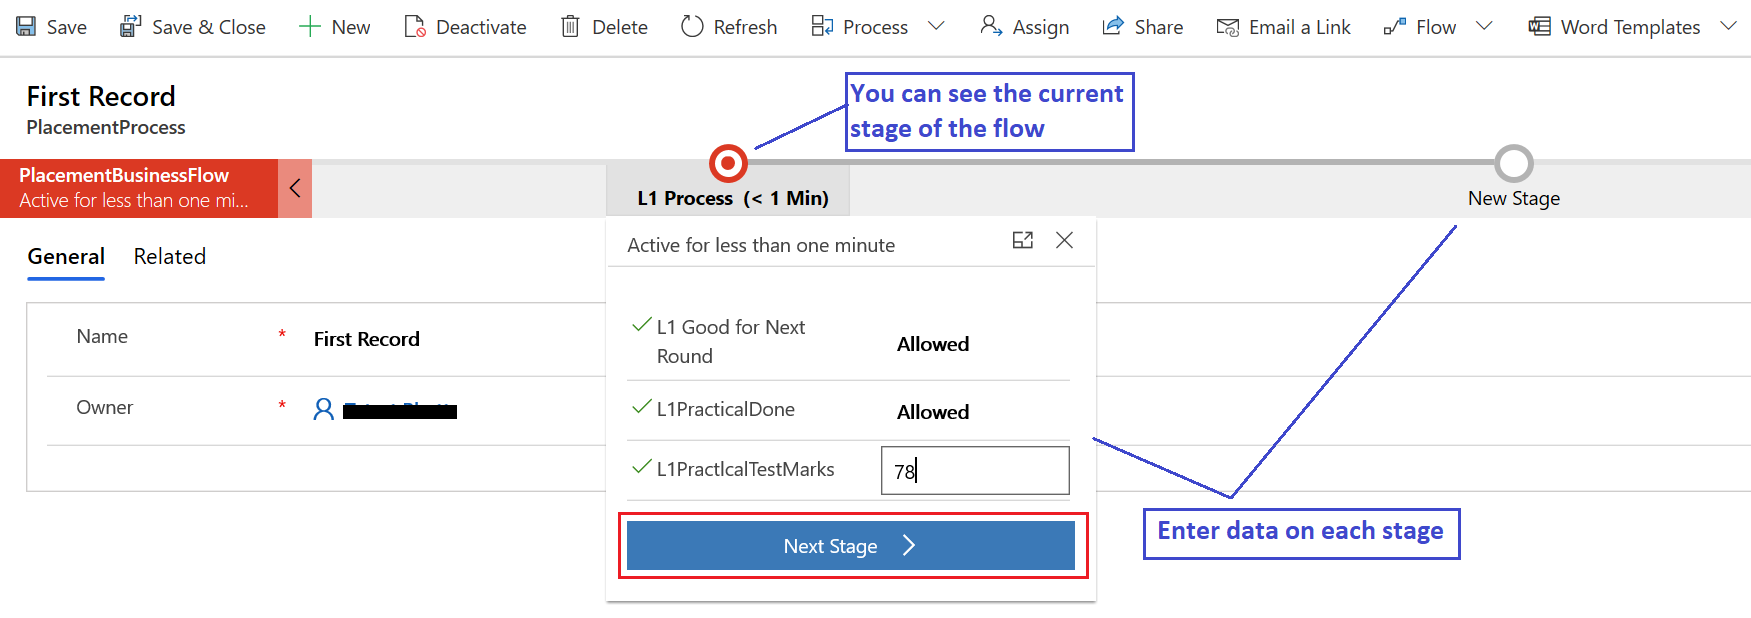 Business Process Flow update stage